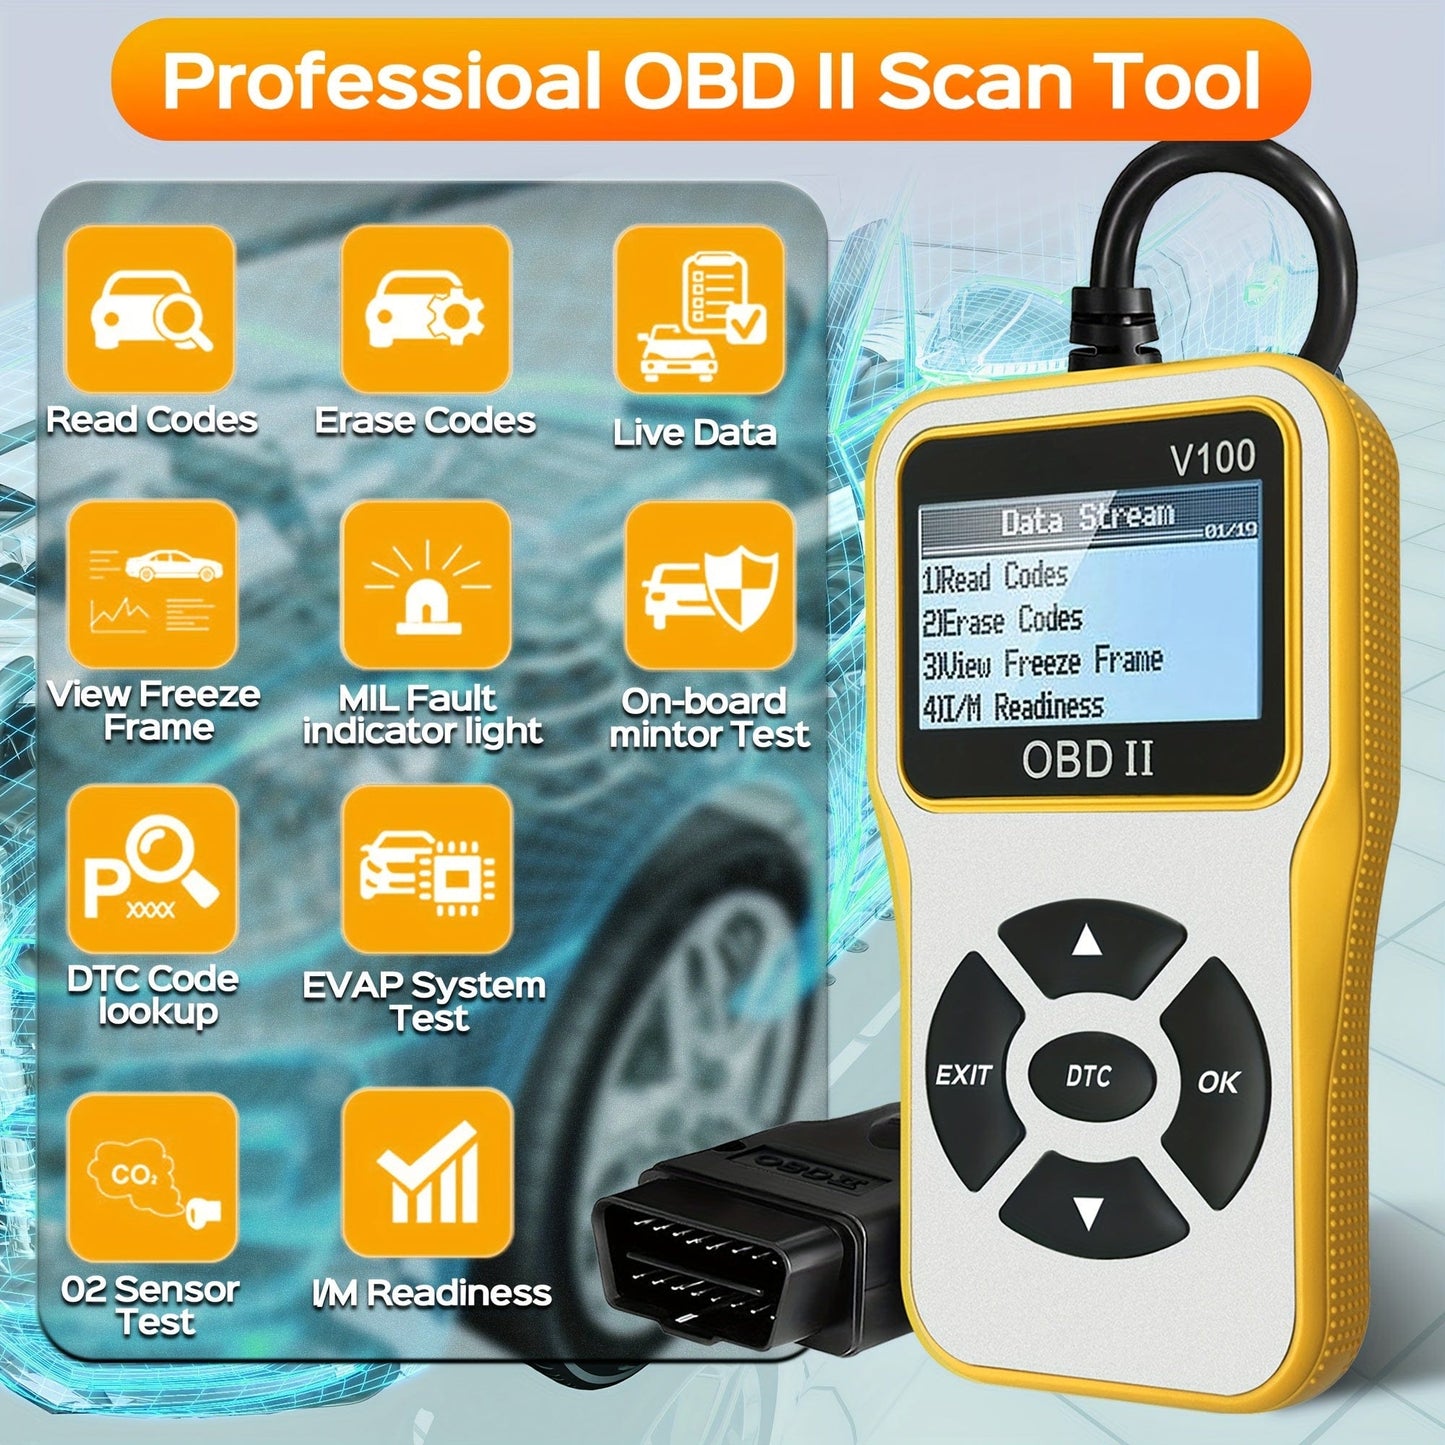 Car OBD2 Scanner Professional Code Reader Vehicle Check Engine Fault Scanner Auto CAN Diagnostic Scan Tool For All OBDII Protocol Cars Since 1996